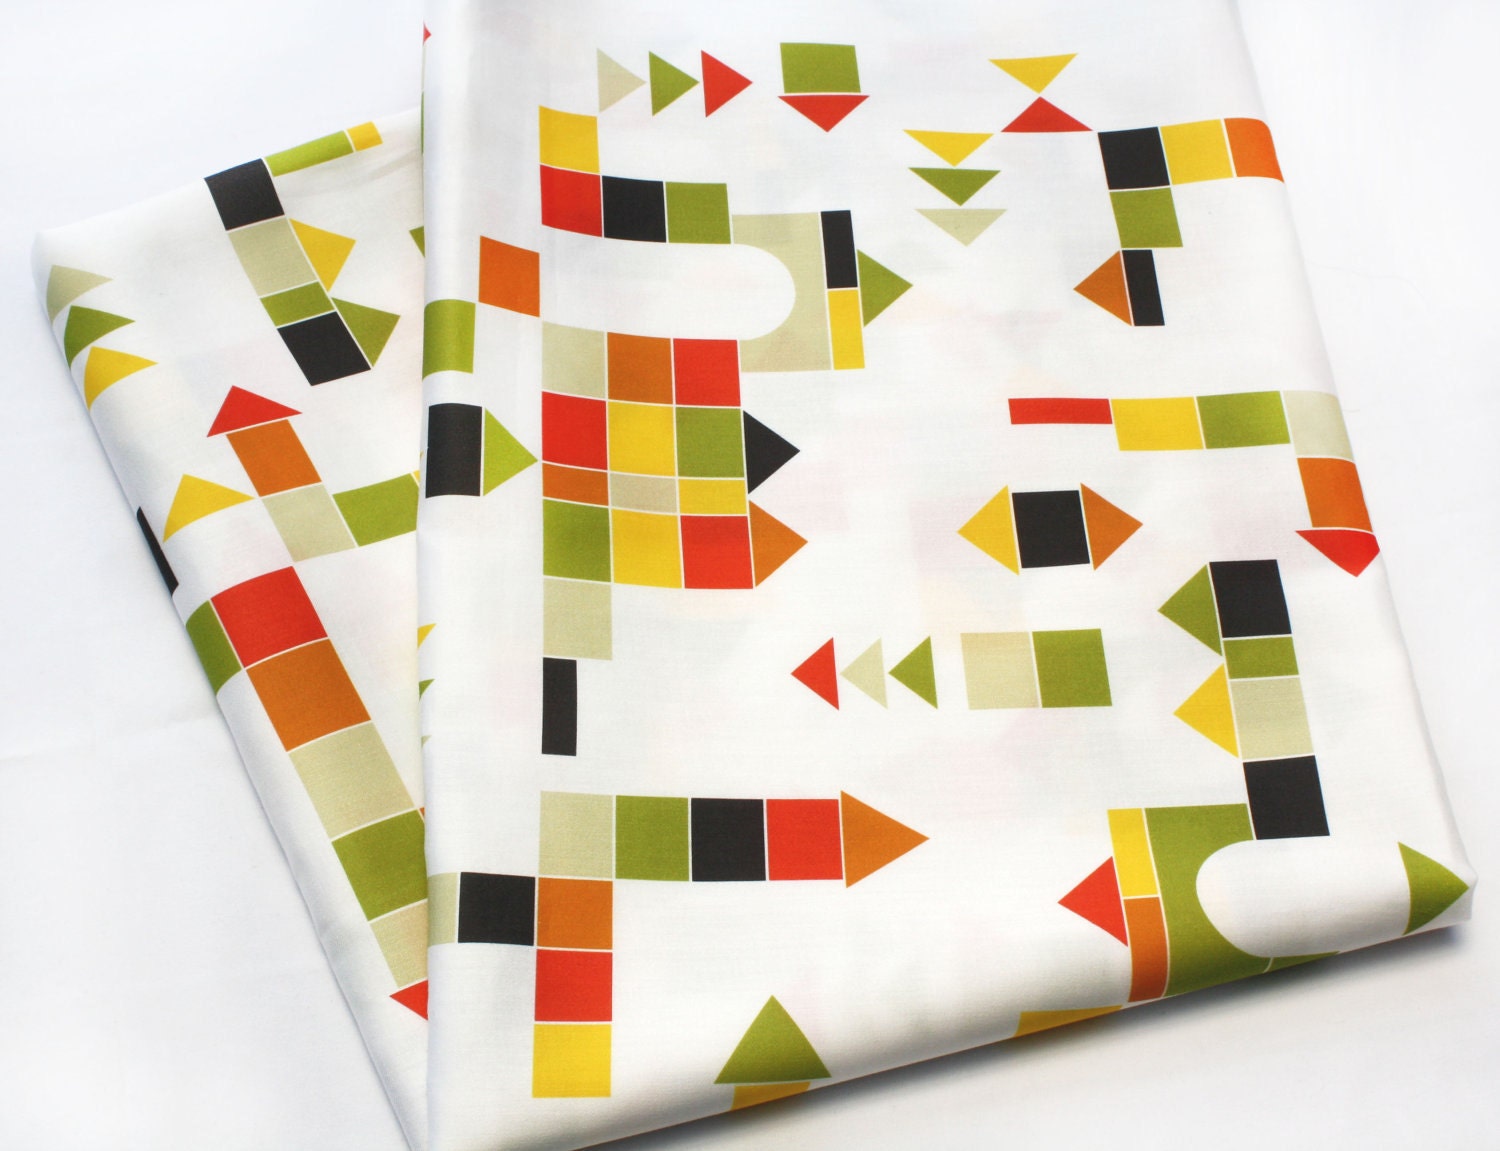 Children's fabric "Building Blocks" perfect for modern baby bedding - (Fat Quarter) Cotton Sateen- Ready to ship